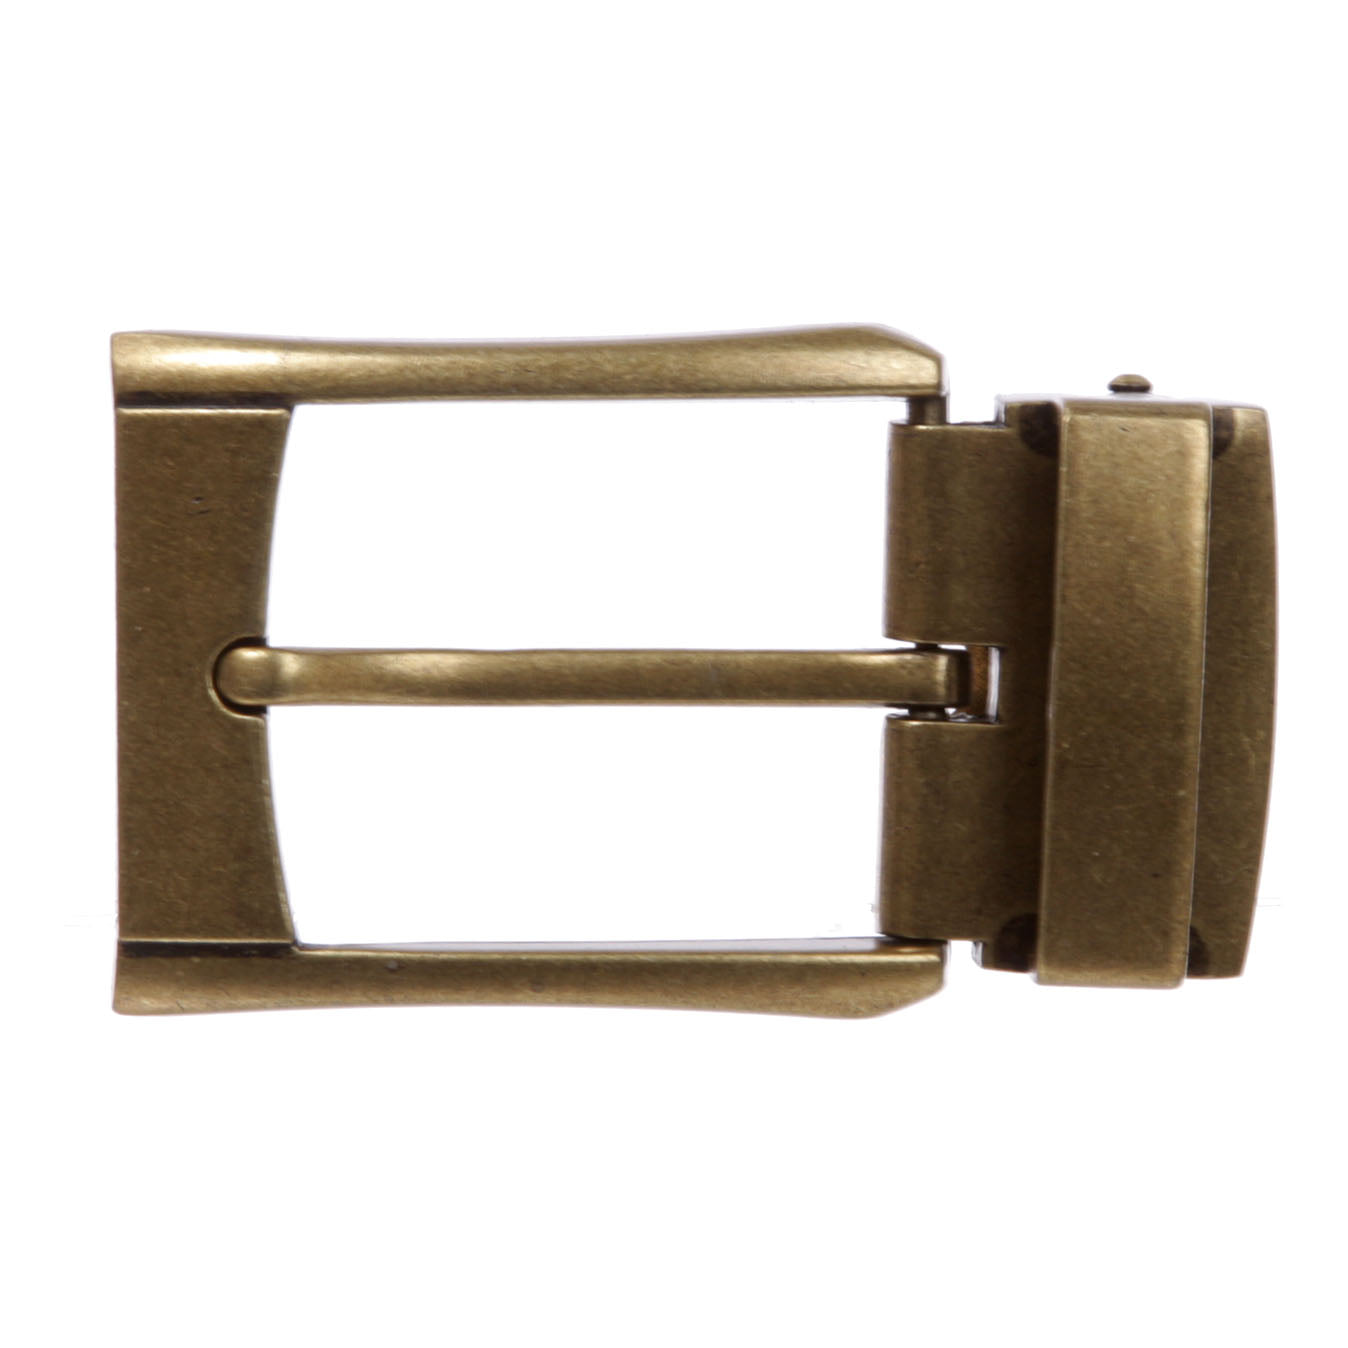 Nickel Free 1 3/8" (35 mm) Clamp Belt Buckle for Replacement or Leather Craft